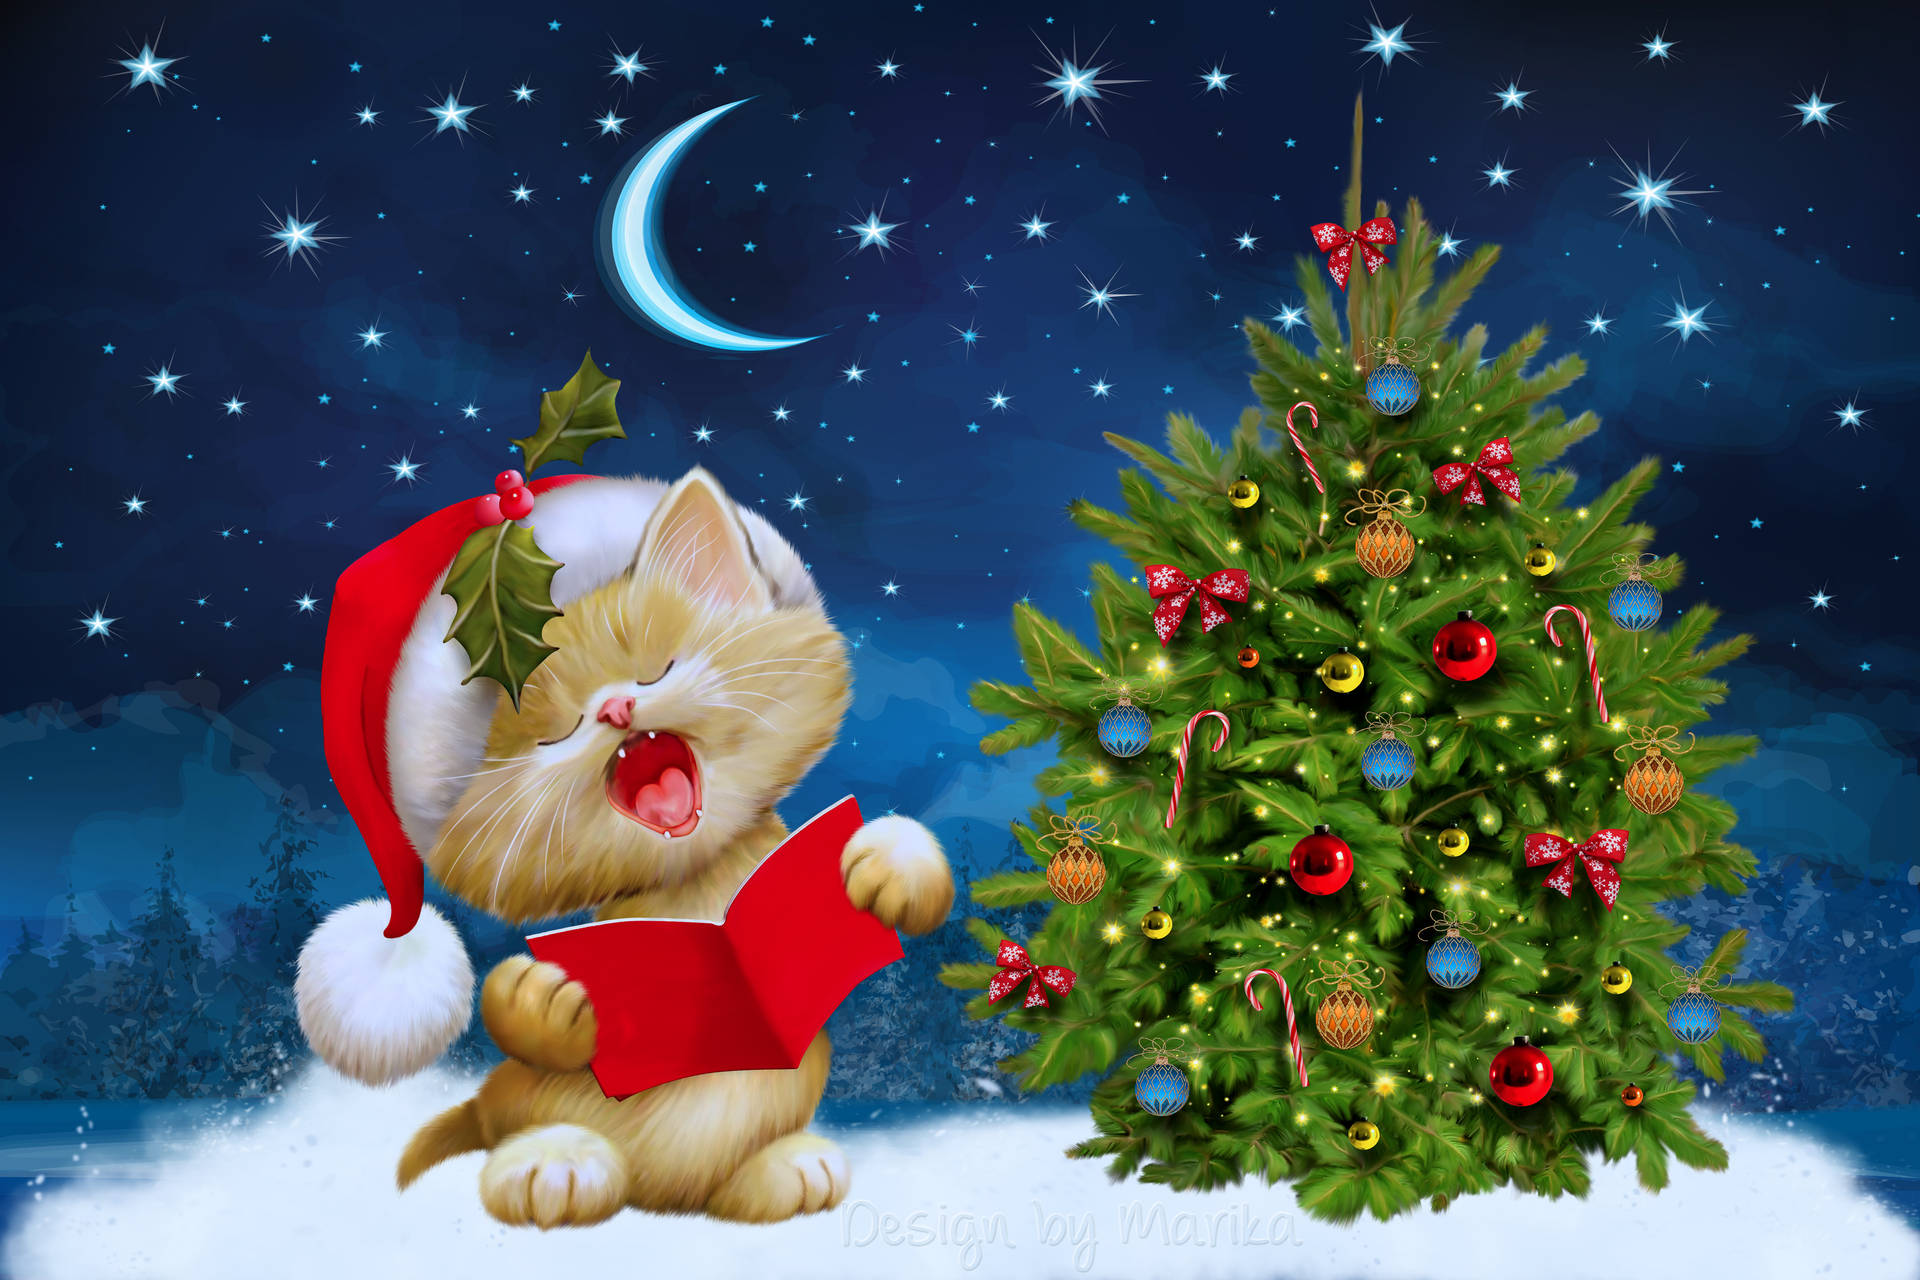 A Cat's New Year's Dream - Celebrating The Holiday With Comfort And Joy! Background